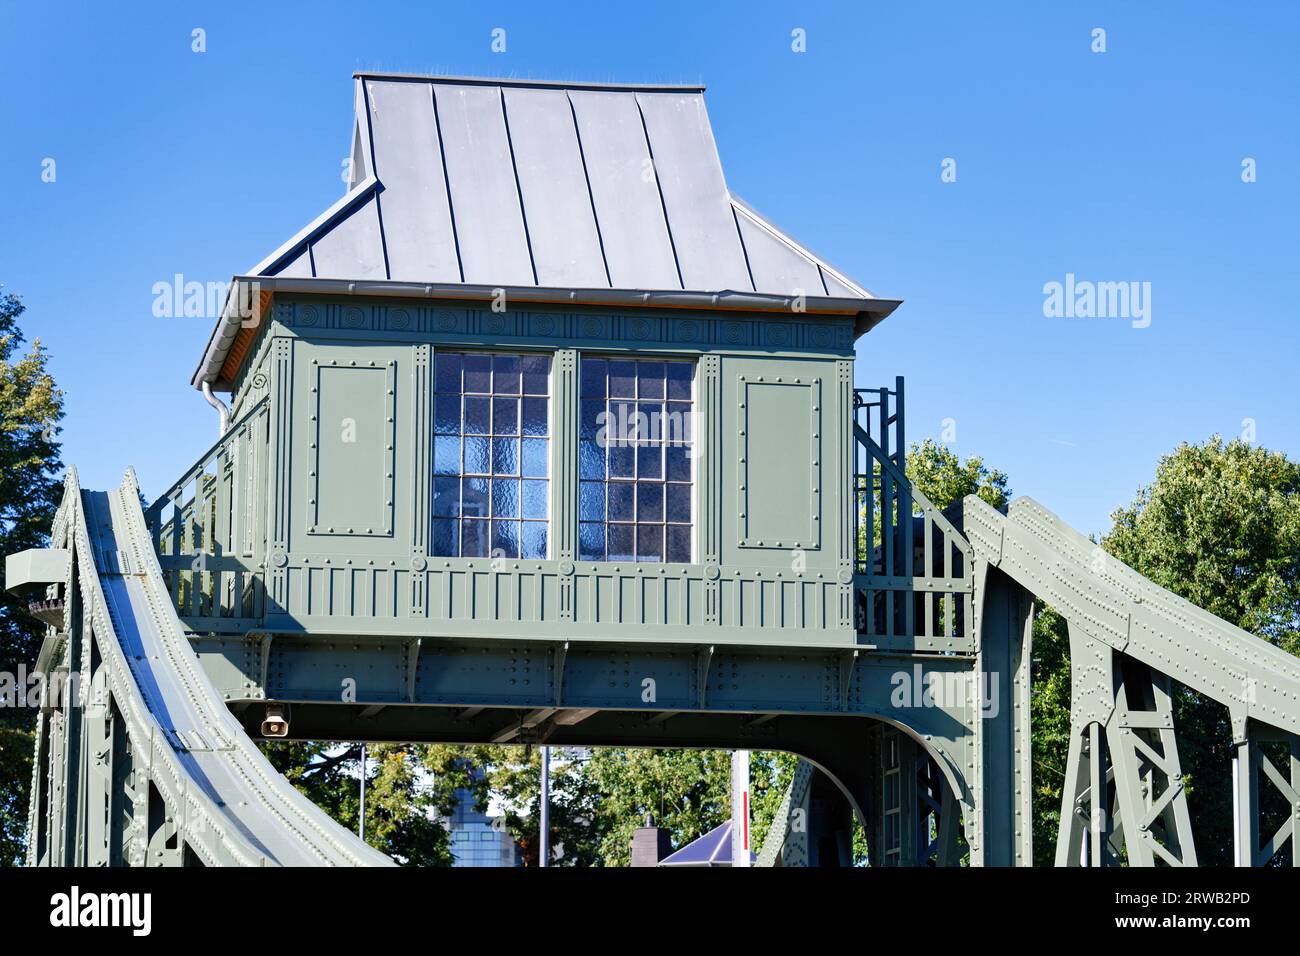 Details of the historic swing bridge at the entrance to the deutz harbor in cologne Stock Photo